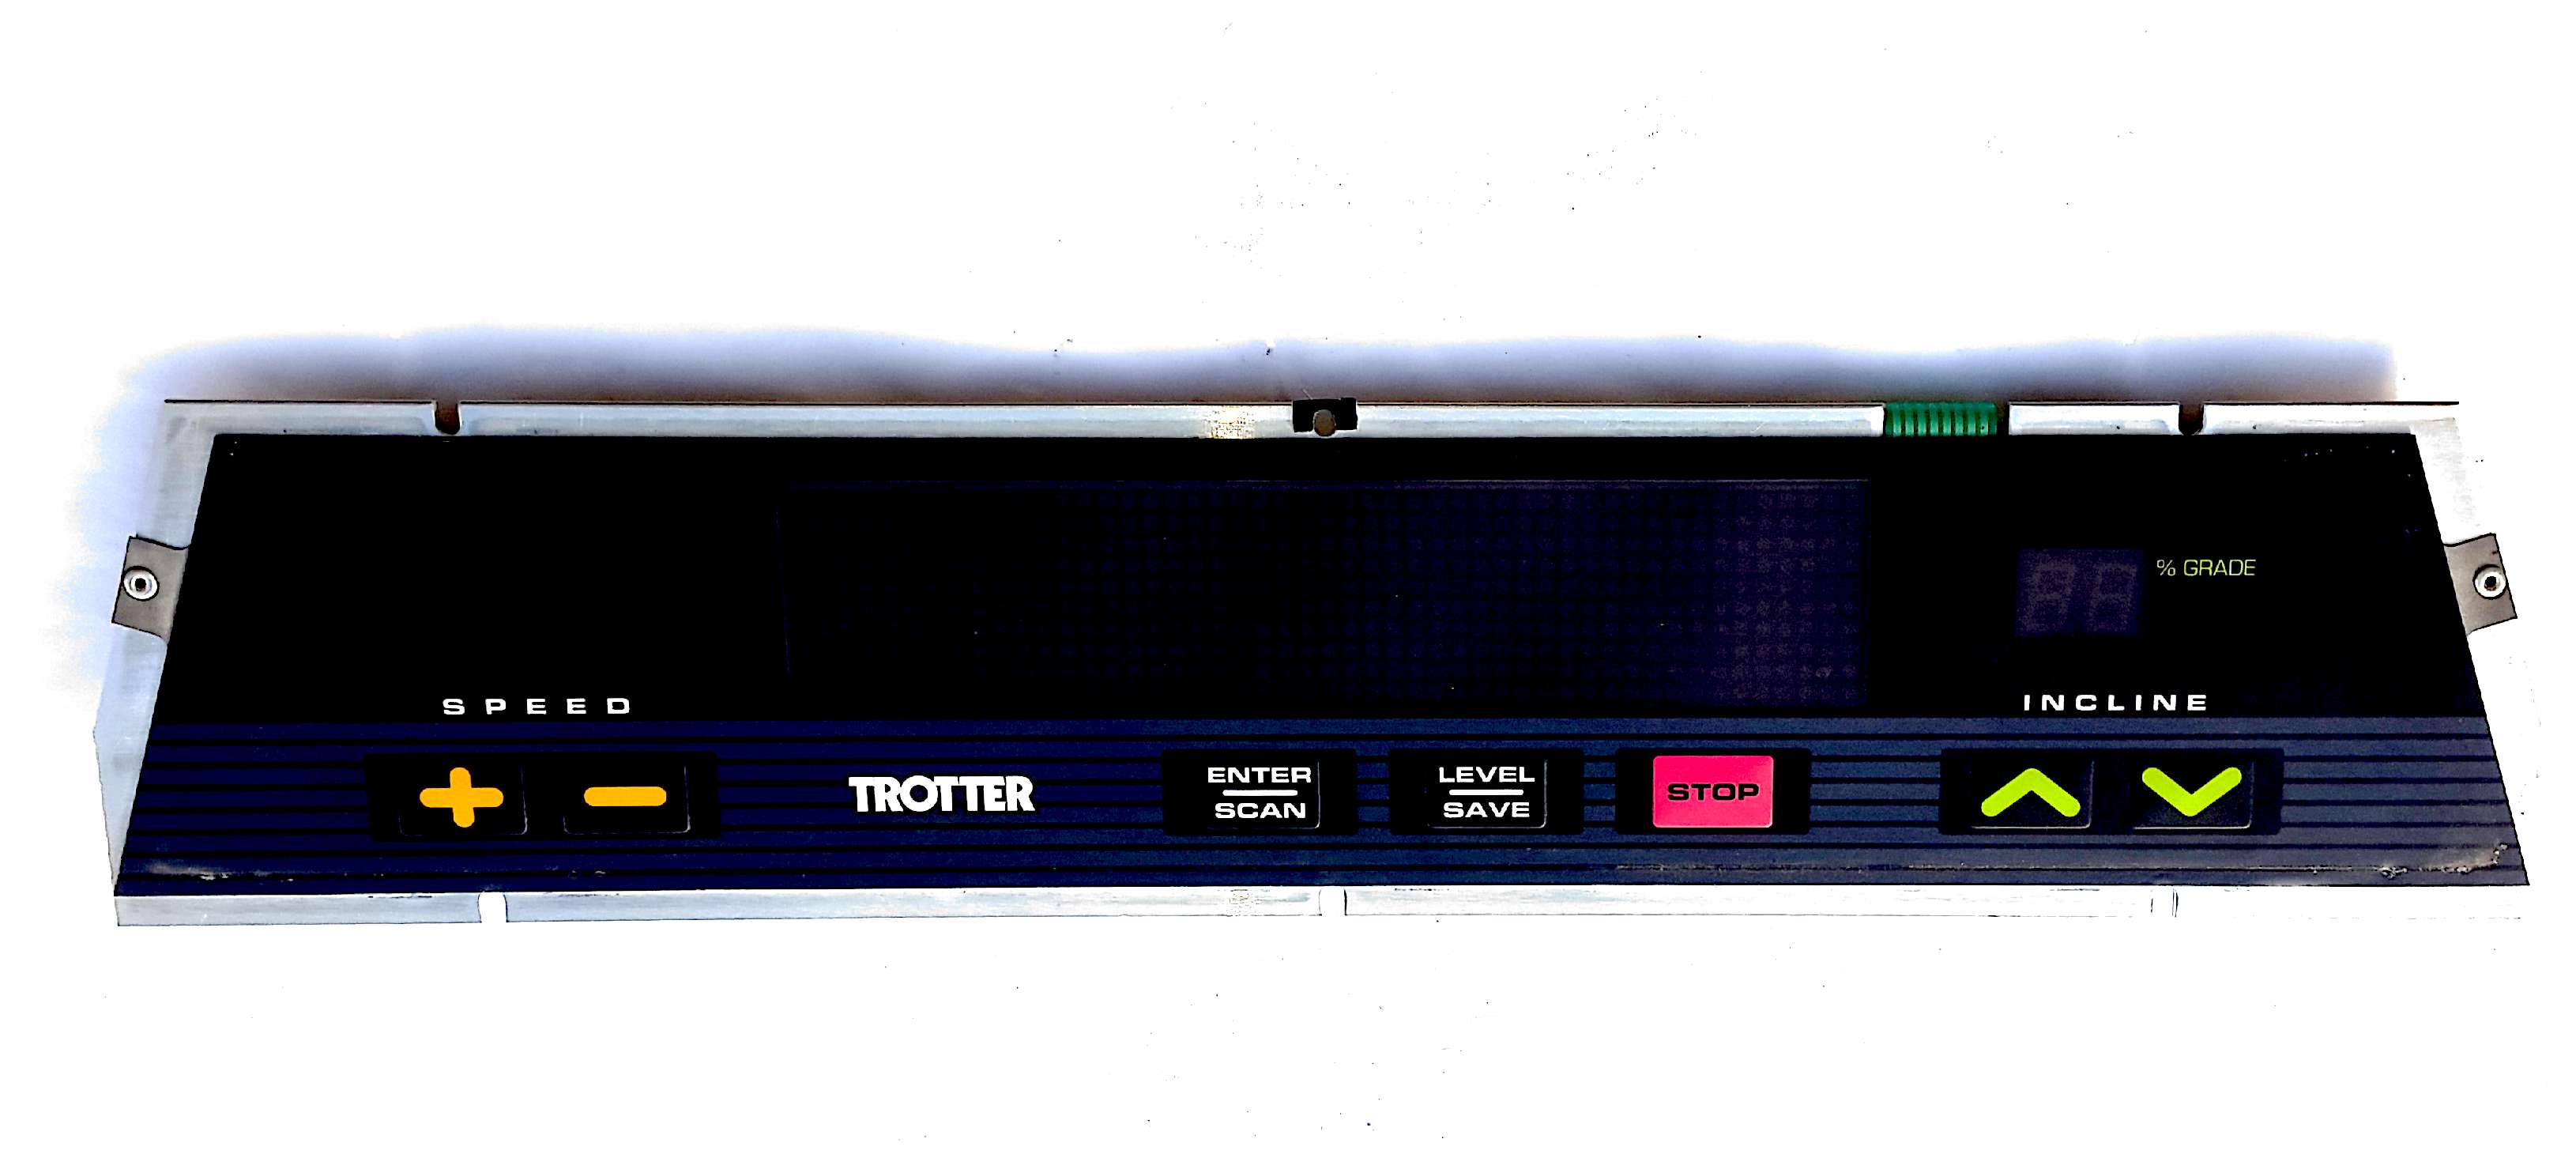 console-display-trotter-525